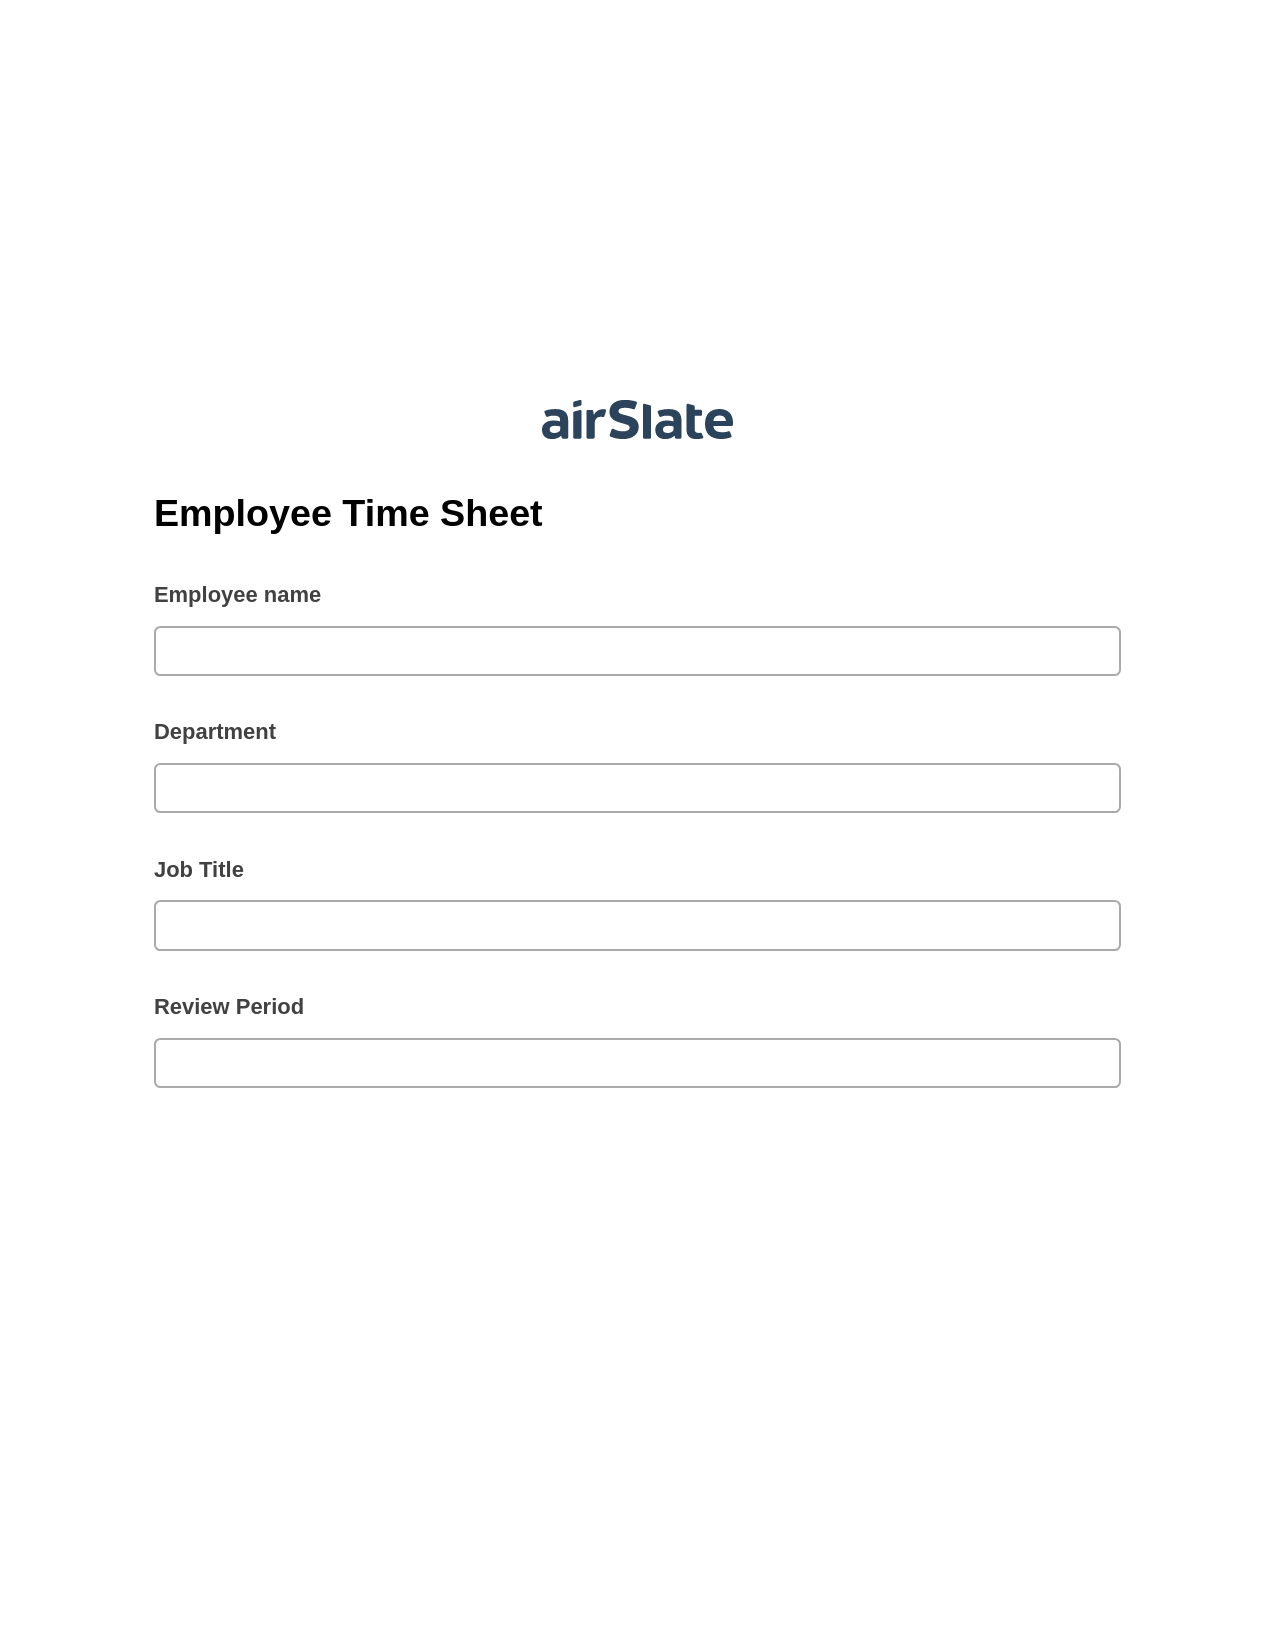 Employee Time Sheet Pre-fill from MS Dynamics 365 Records, Create Salesforce Records Bot, Export to NetSuite Bot